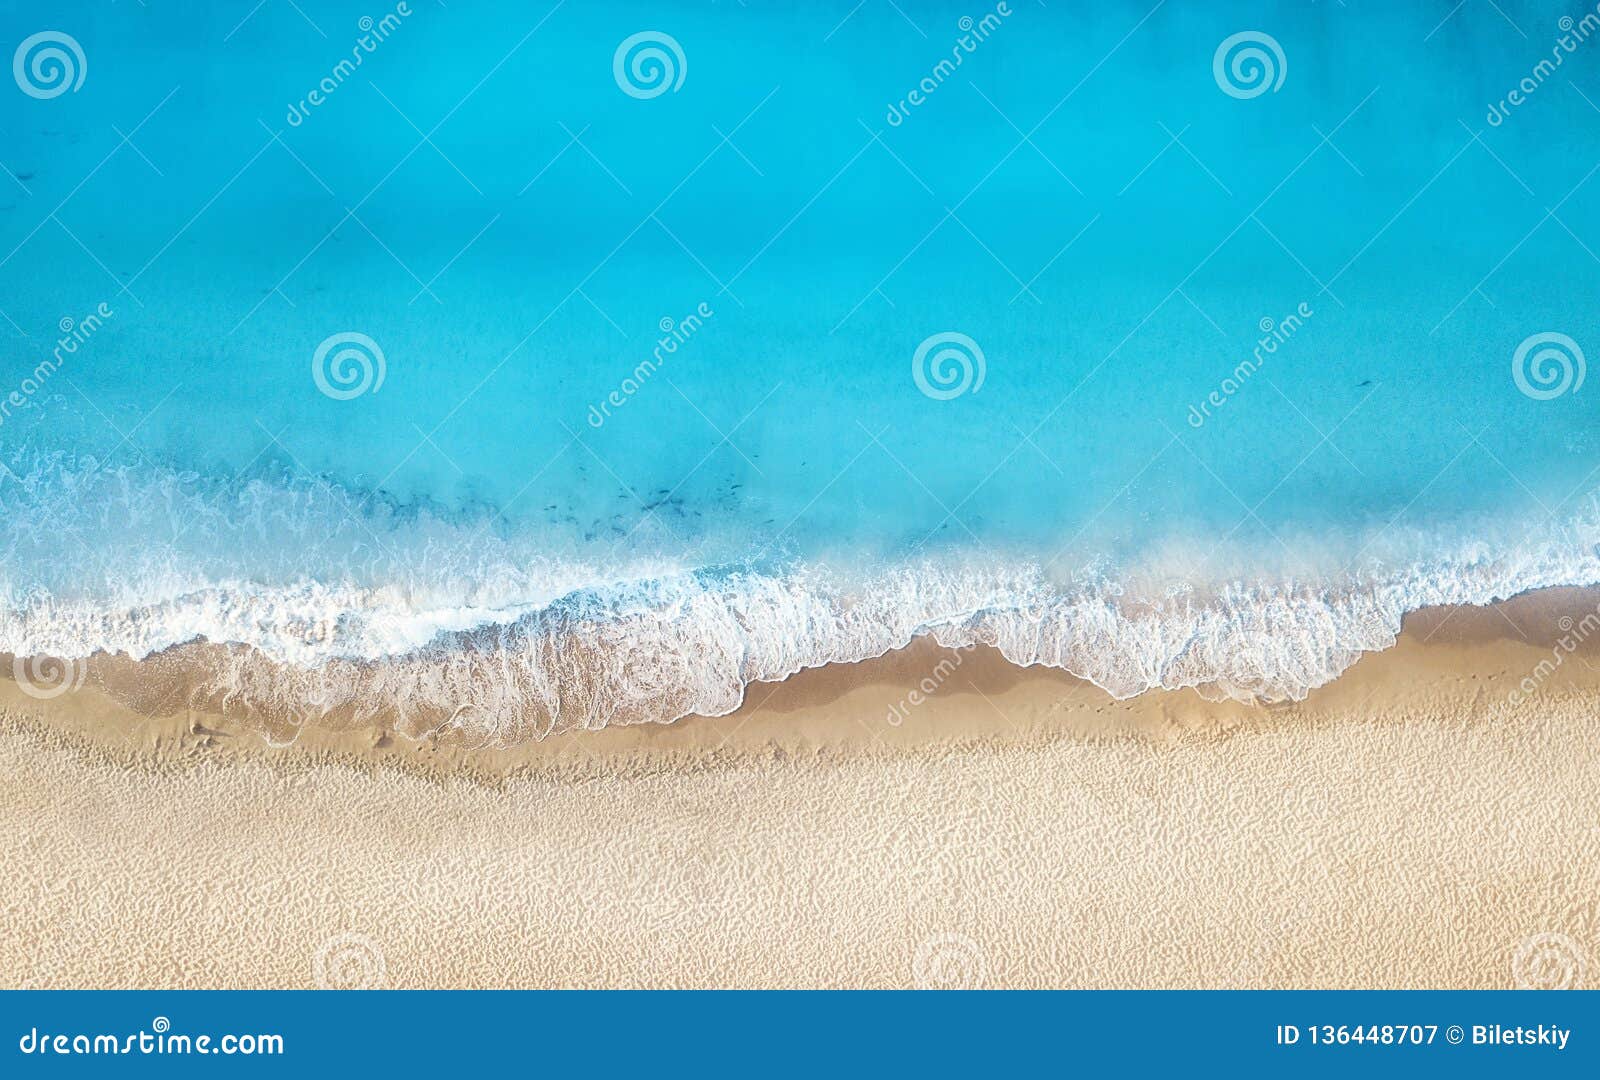 beach and waves from top view. turquoise water background from top view. summer seascape from air.